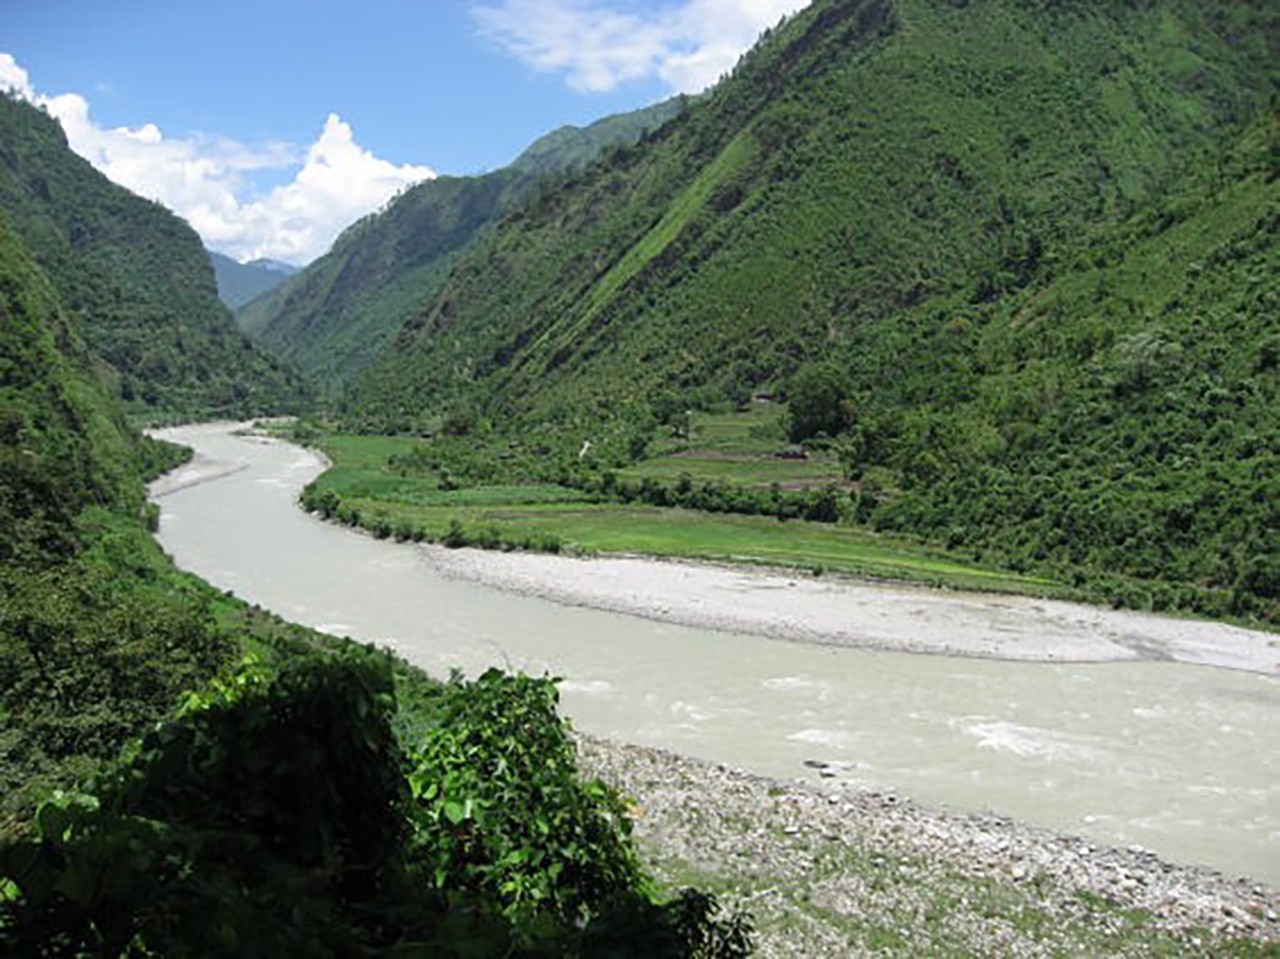 The West Seti river in Nepal. Photo: Handout